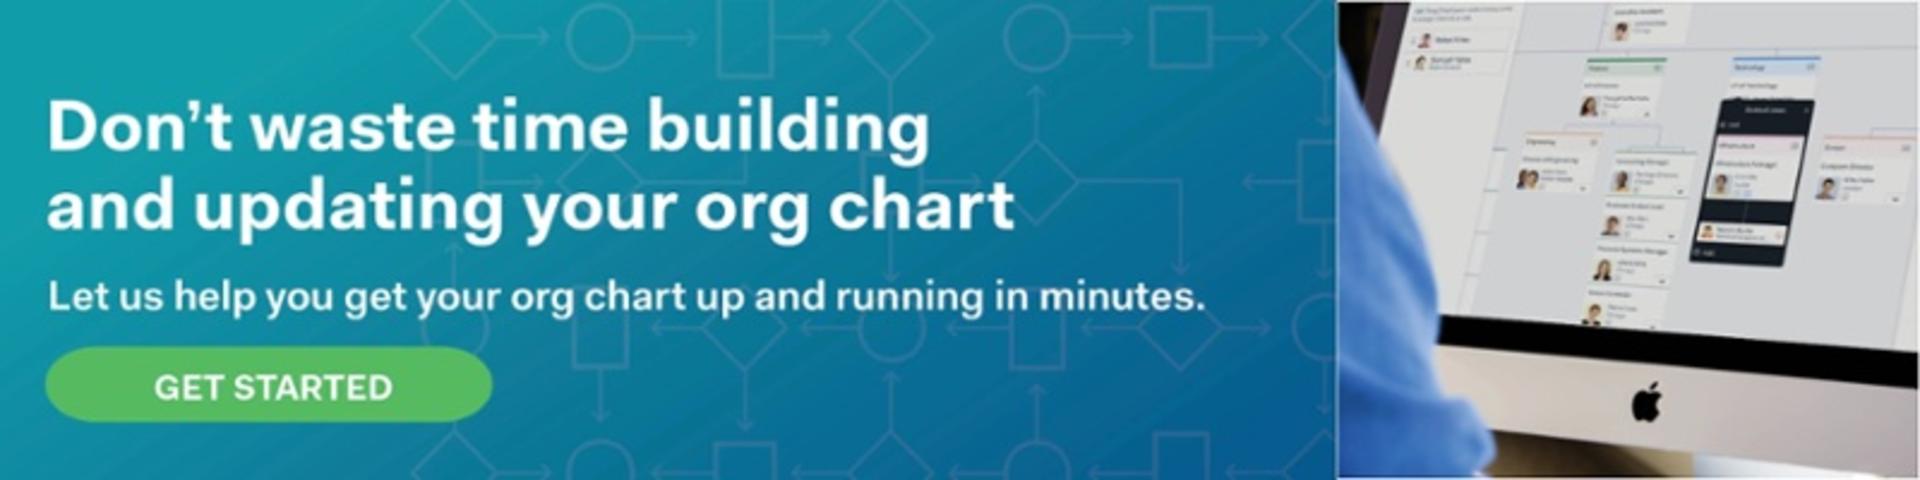 get help building your org chart